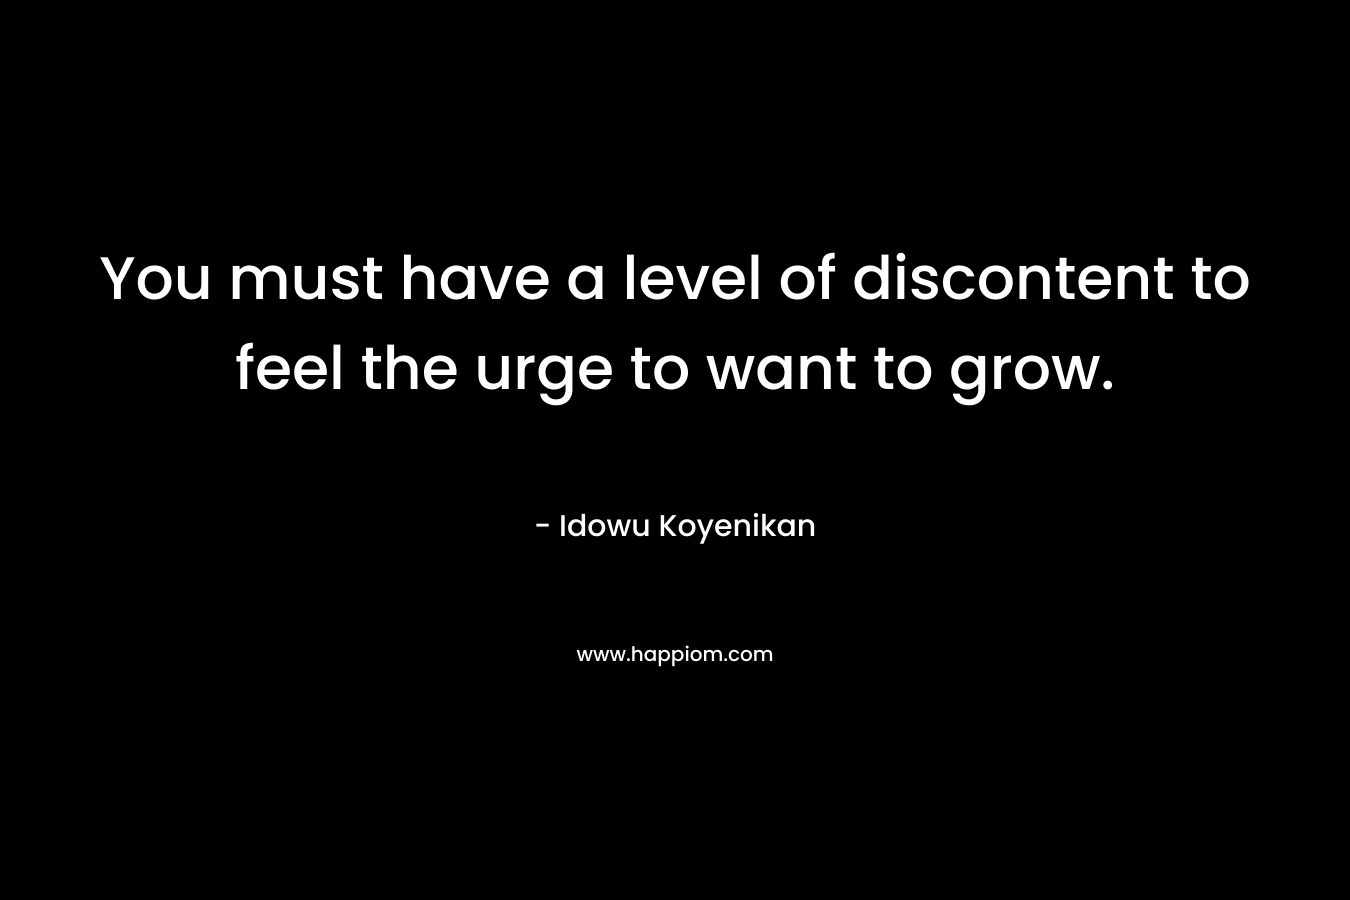 You must have a level of discontent to feel the urge to want to grow.